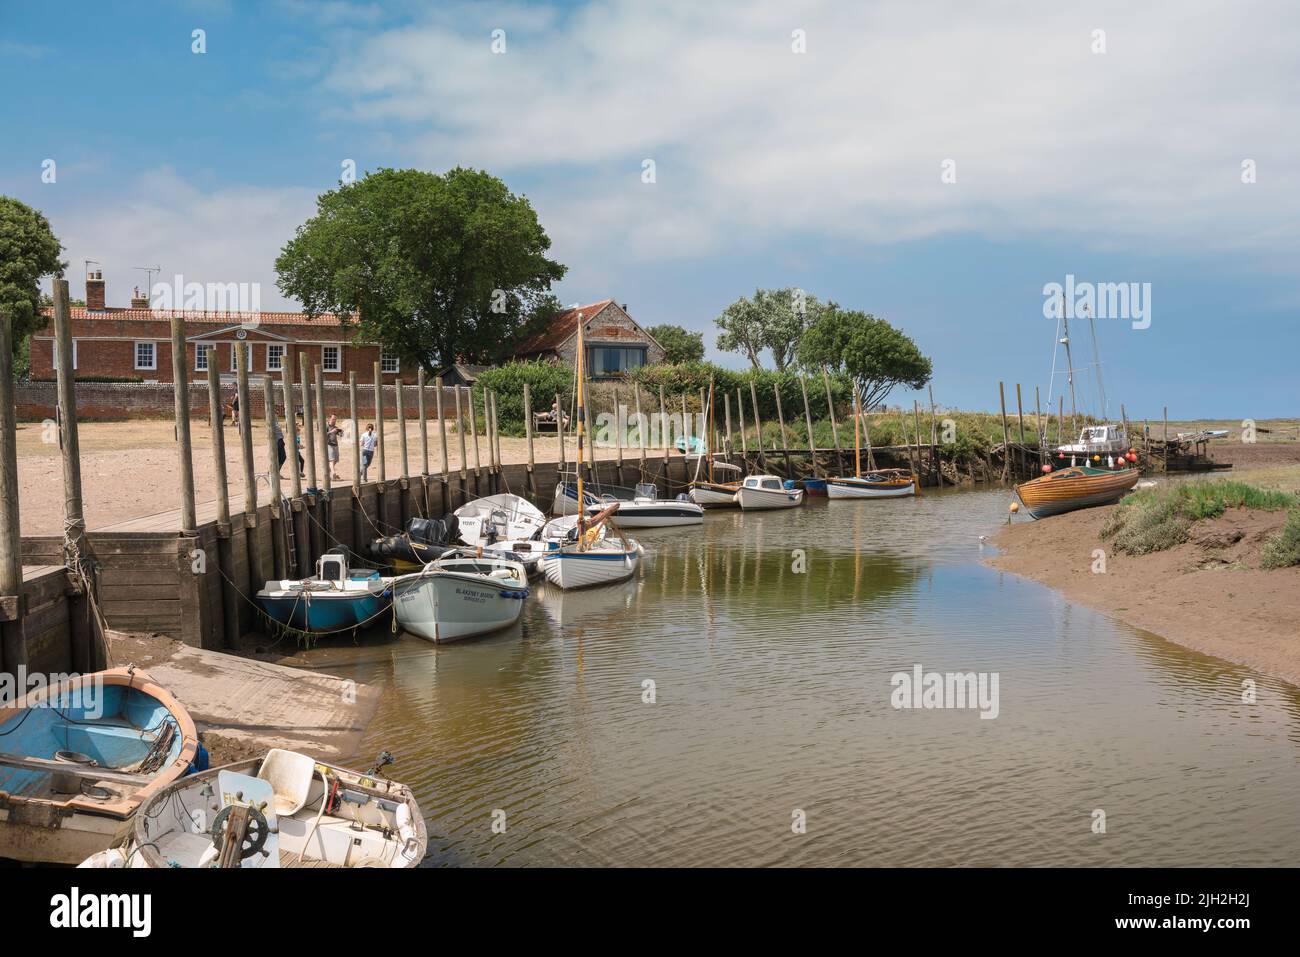 North Norfolk coast, view in summer of leisure boats moored in the River Glaven in the scenic seaside town of Blakeney, north Norfolk, England, UK Stock Photo